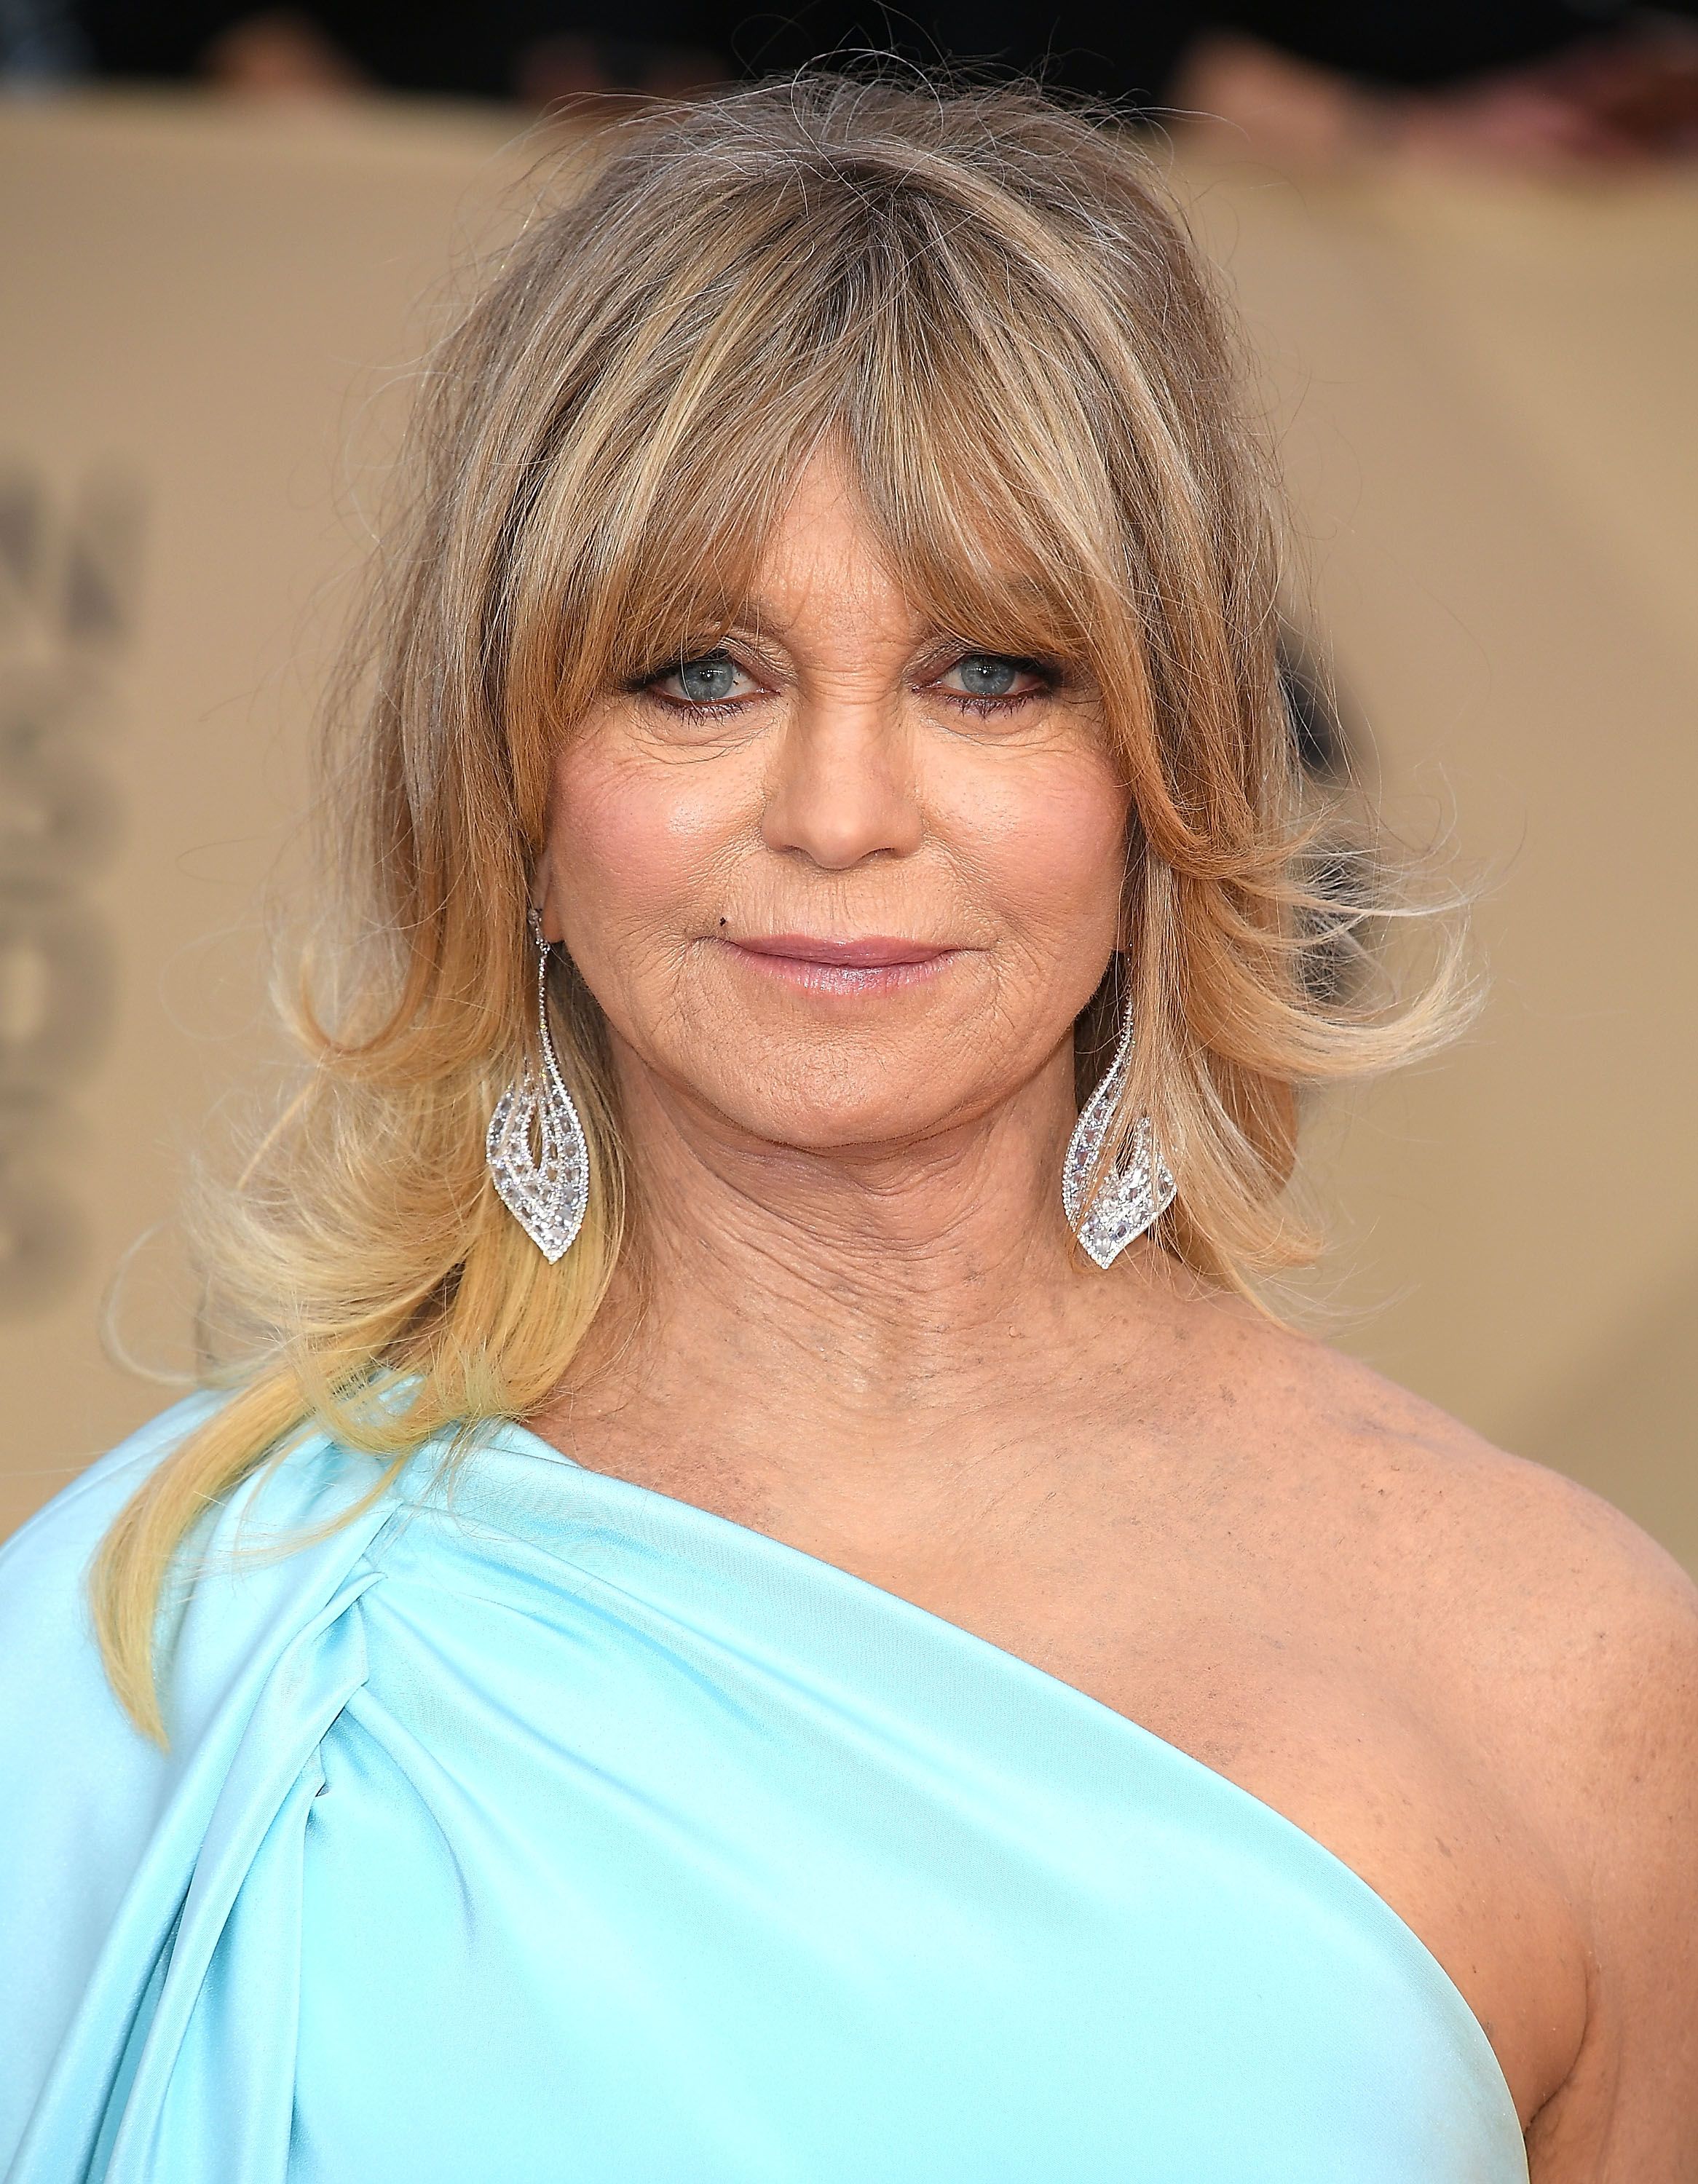 Goldie Hawn at the 24th Annual Screen Actors-Guild Awards at The Shrine Auditorium on January 21, 2018 in Los Angeles, California. | Photo: Getty Images